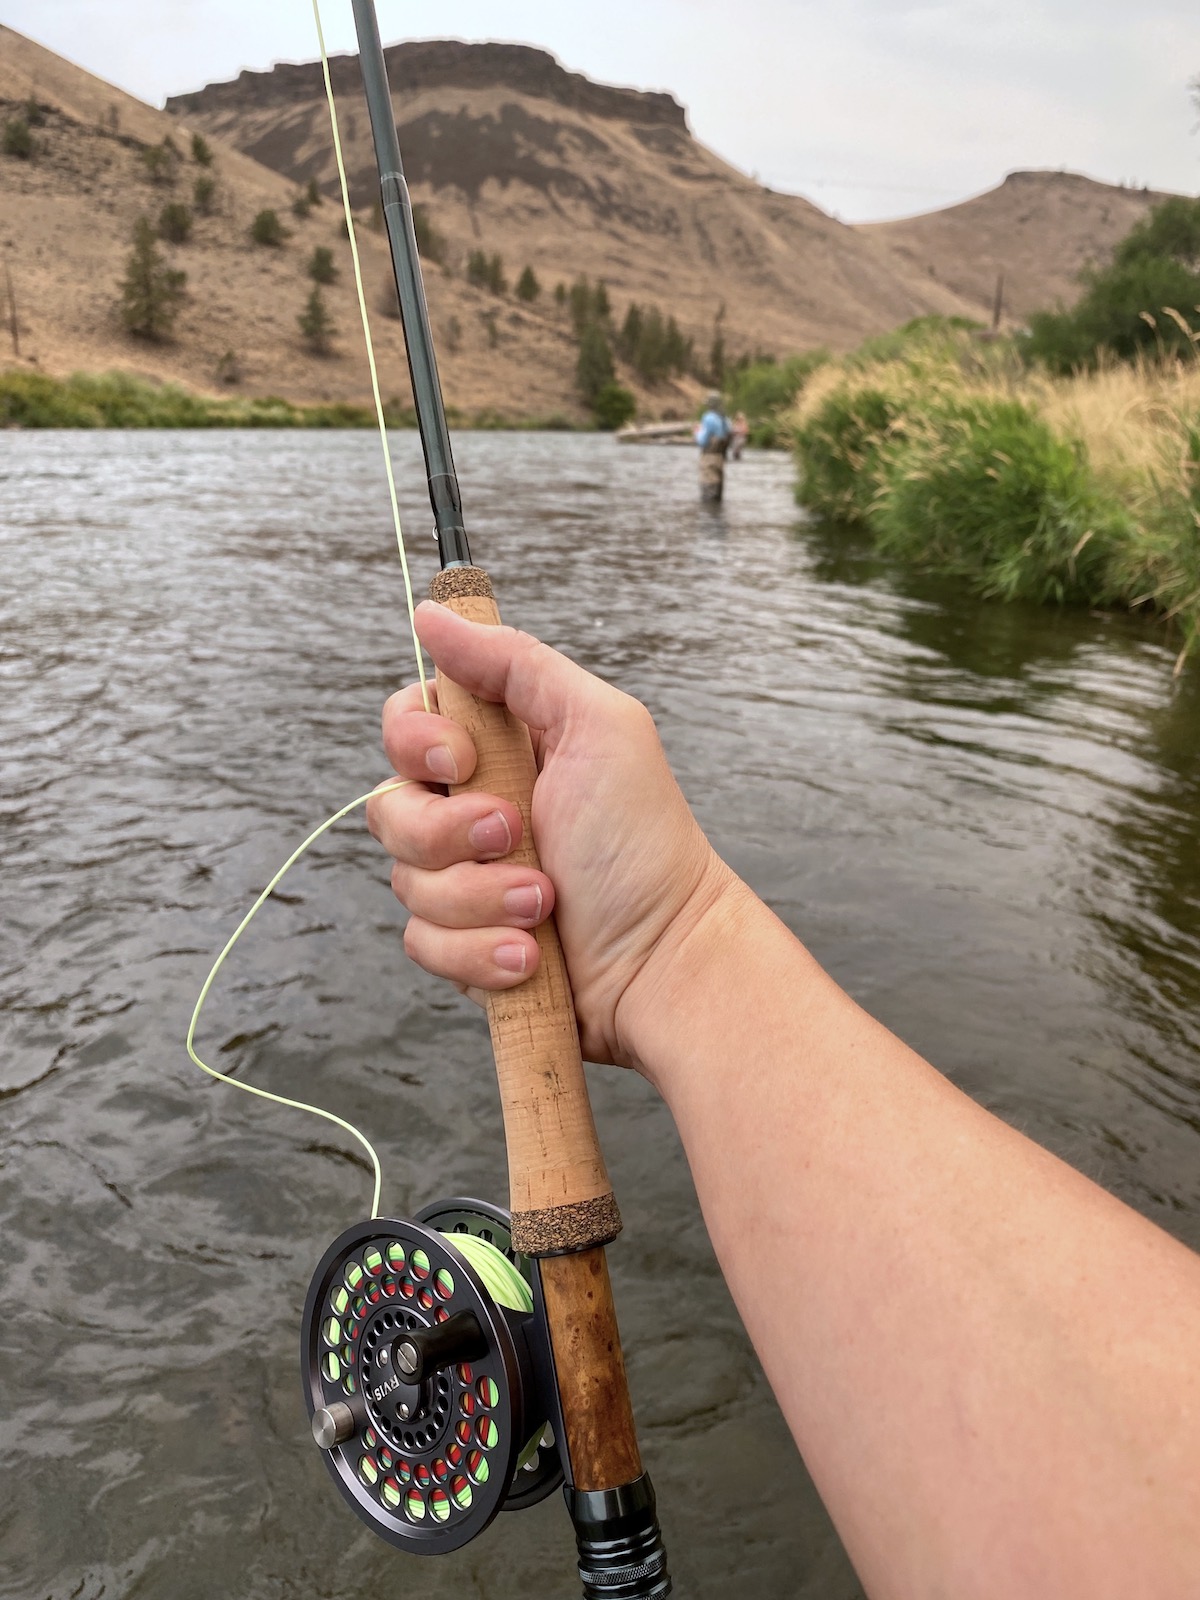 Hand holding a fishing rod and reel out over a river